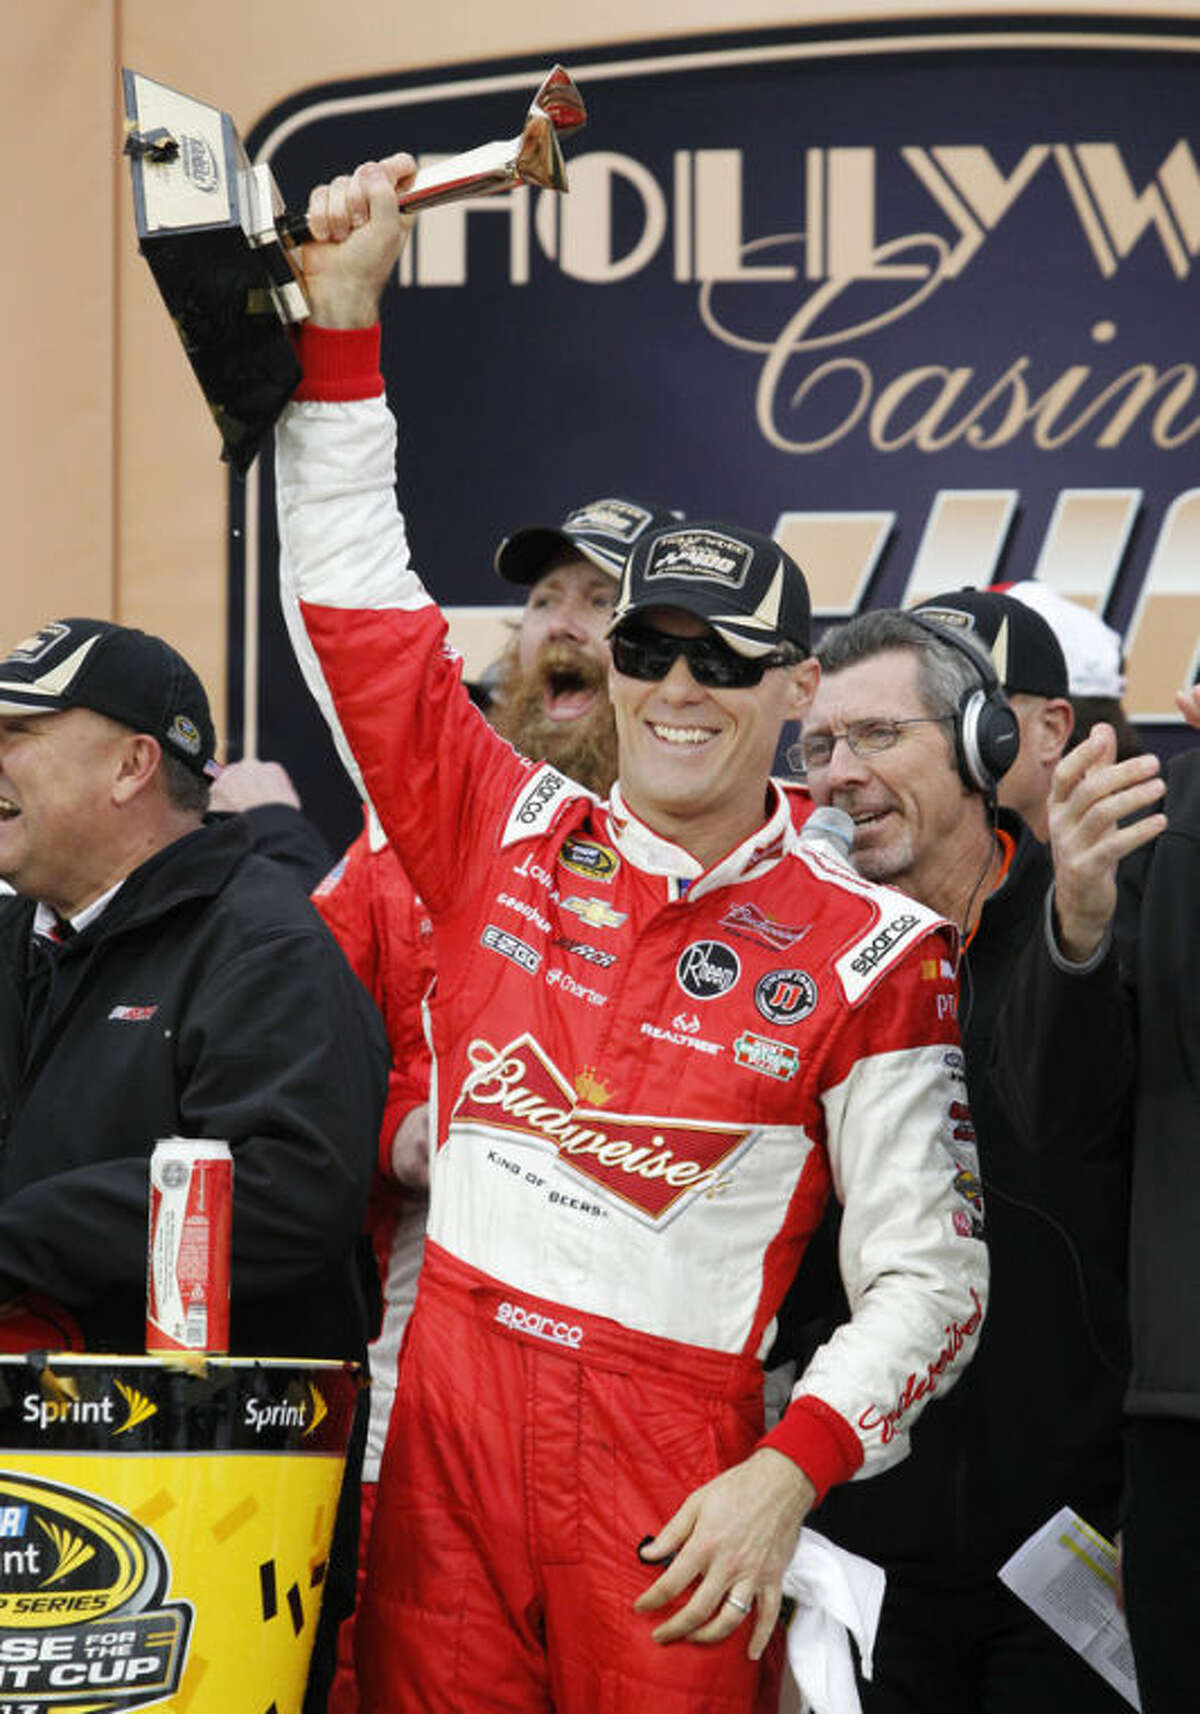 Driver Kevin Harvick celebrates in victory lane after winning the Hollywood Casino 400 NASCAR Sprint Cup series auto race at Kansas Speedway in Kansas City, Kan., Sunday, Oct. 6, 2013. (AP Photo/Colin E. Braley)